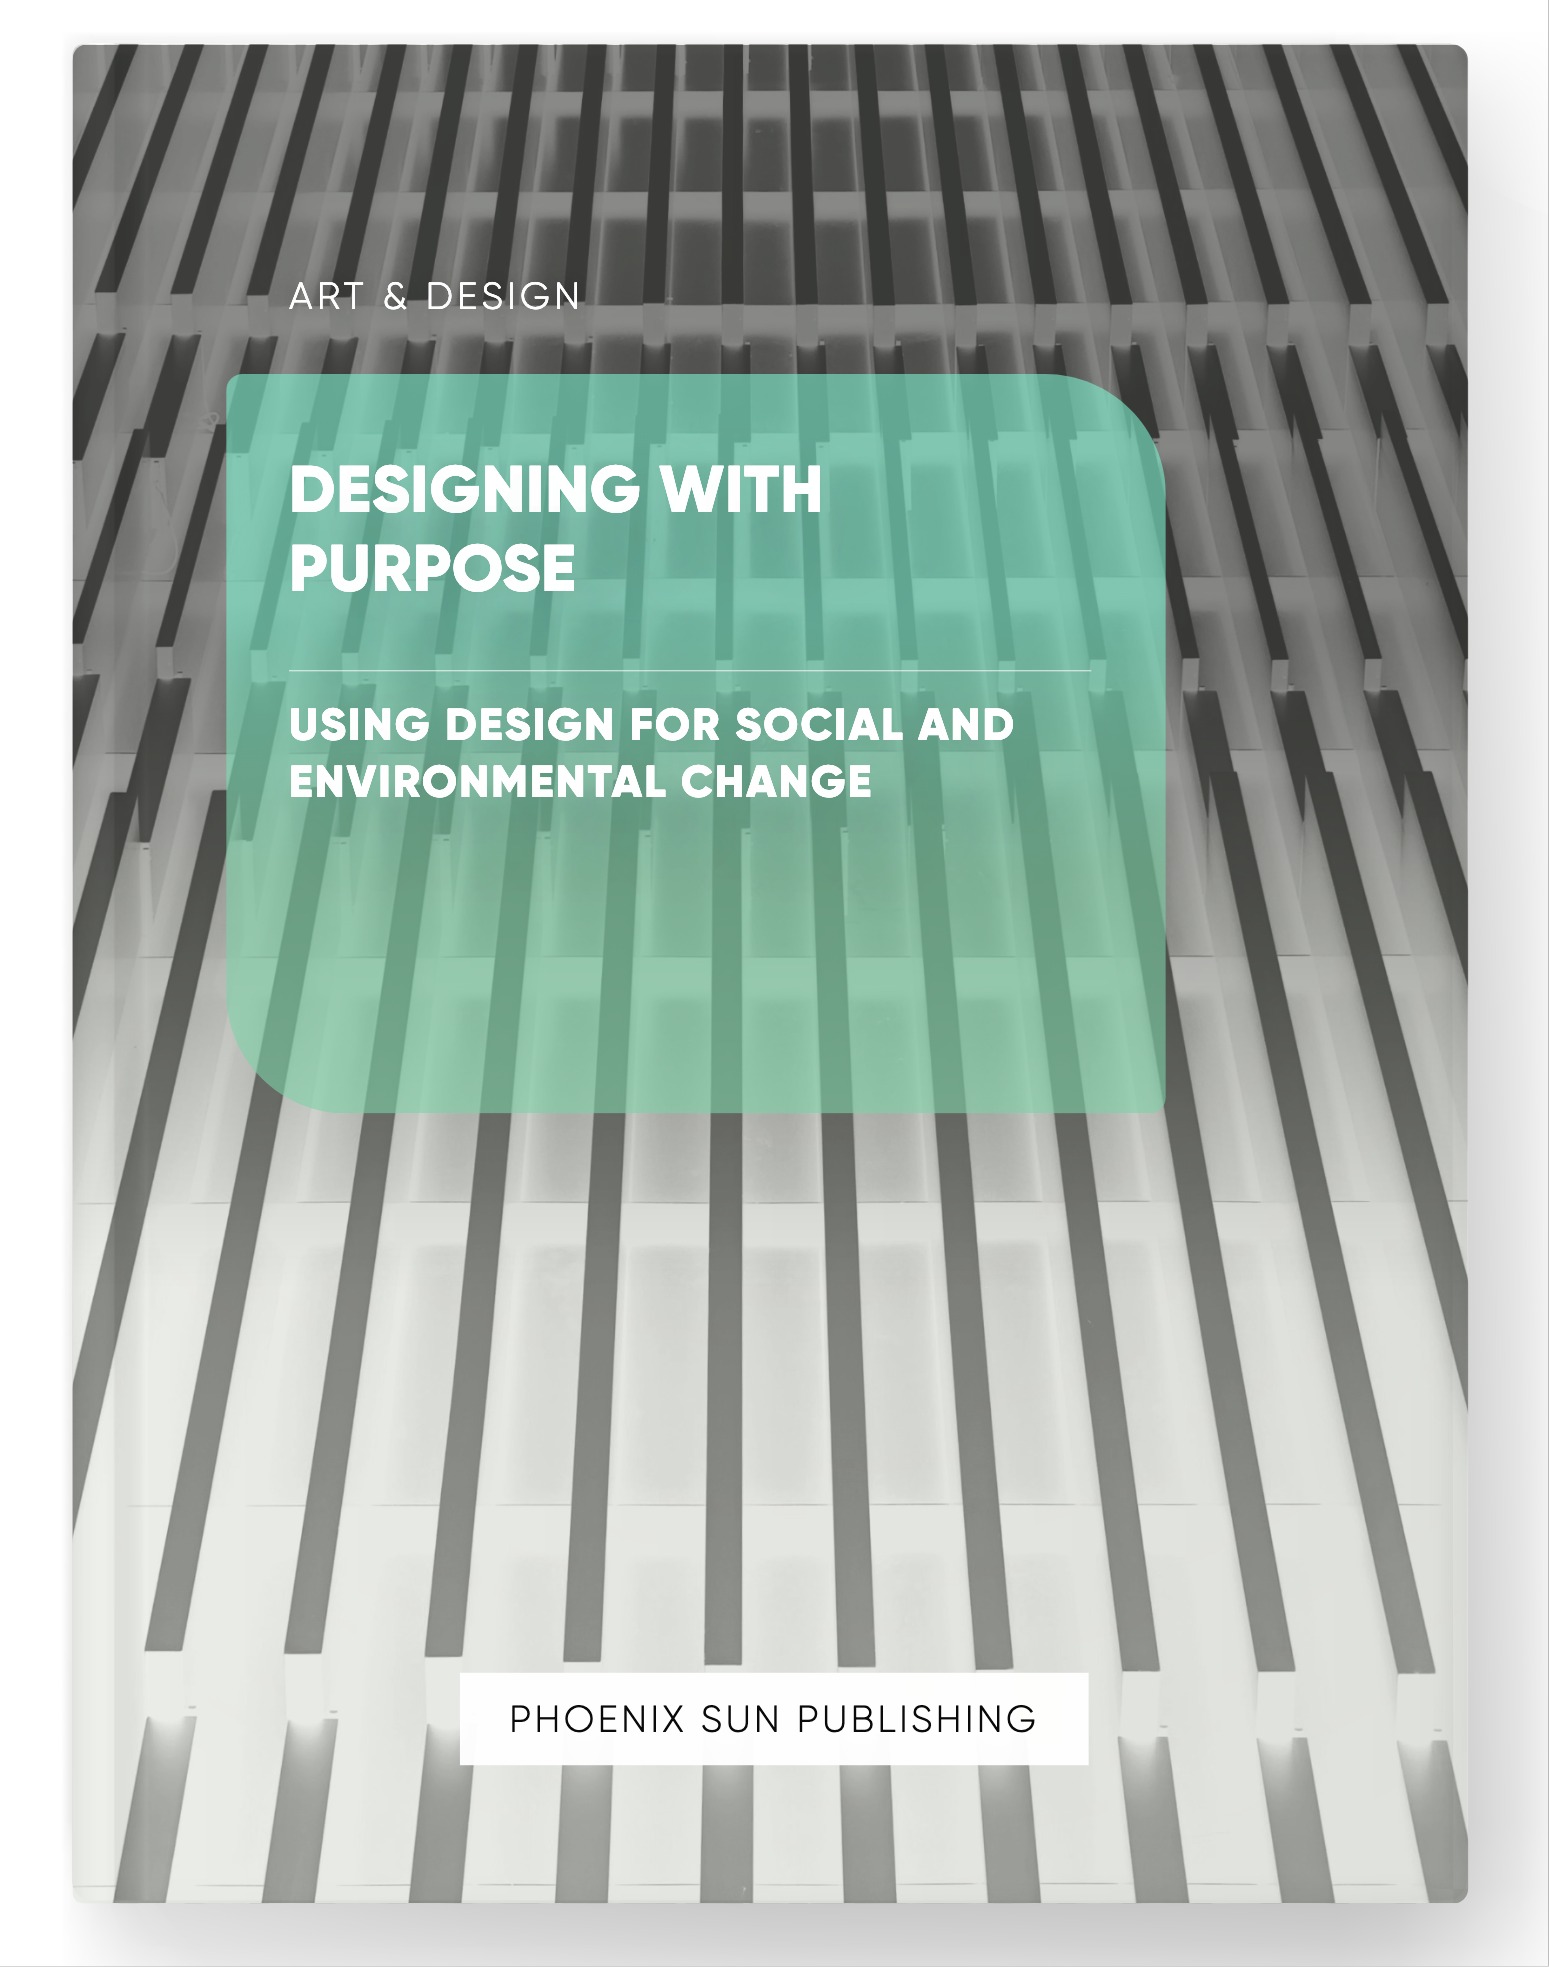 Designing with Purpose – Using Design for Social and Environmental Change